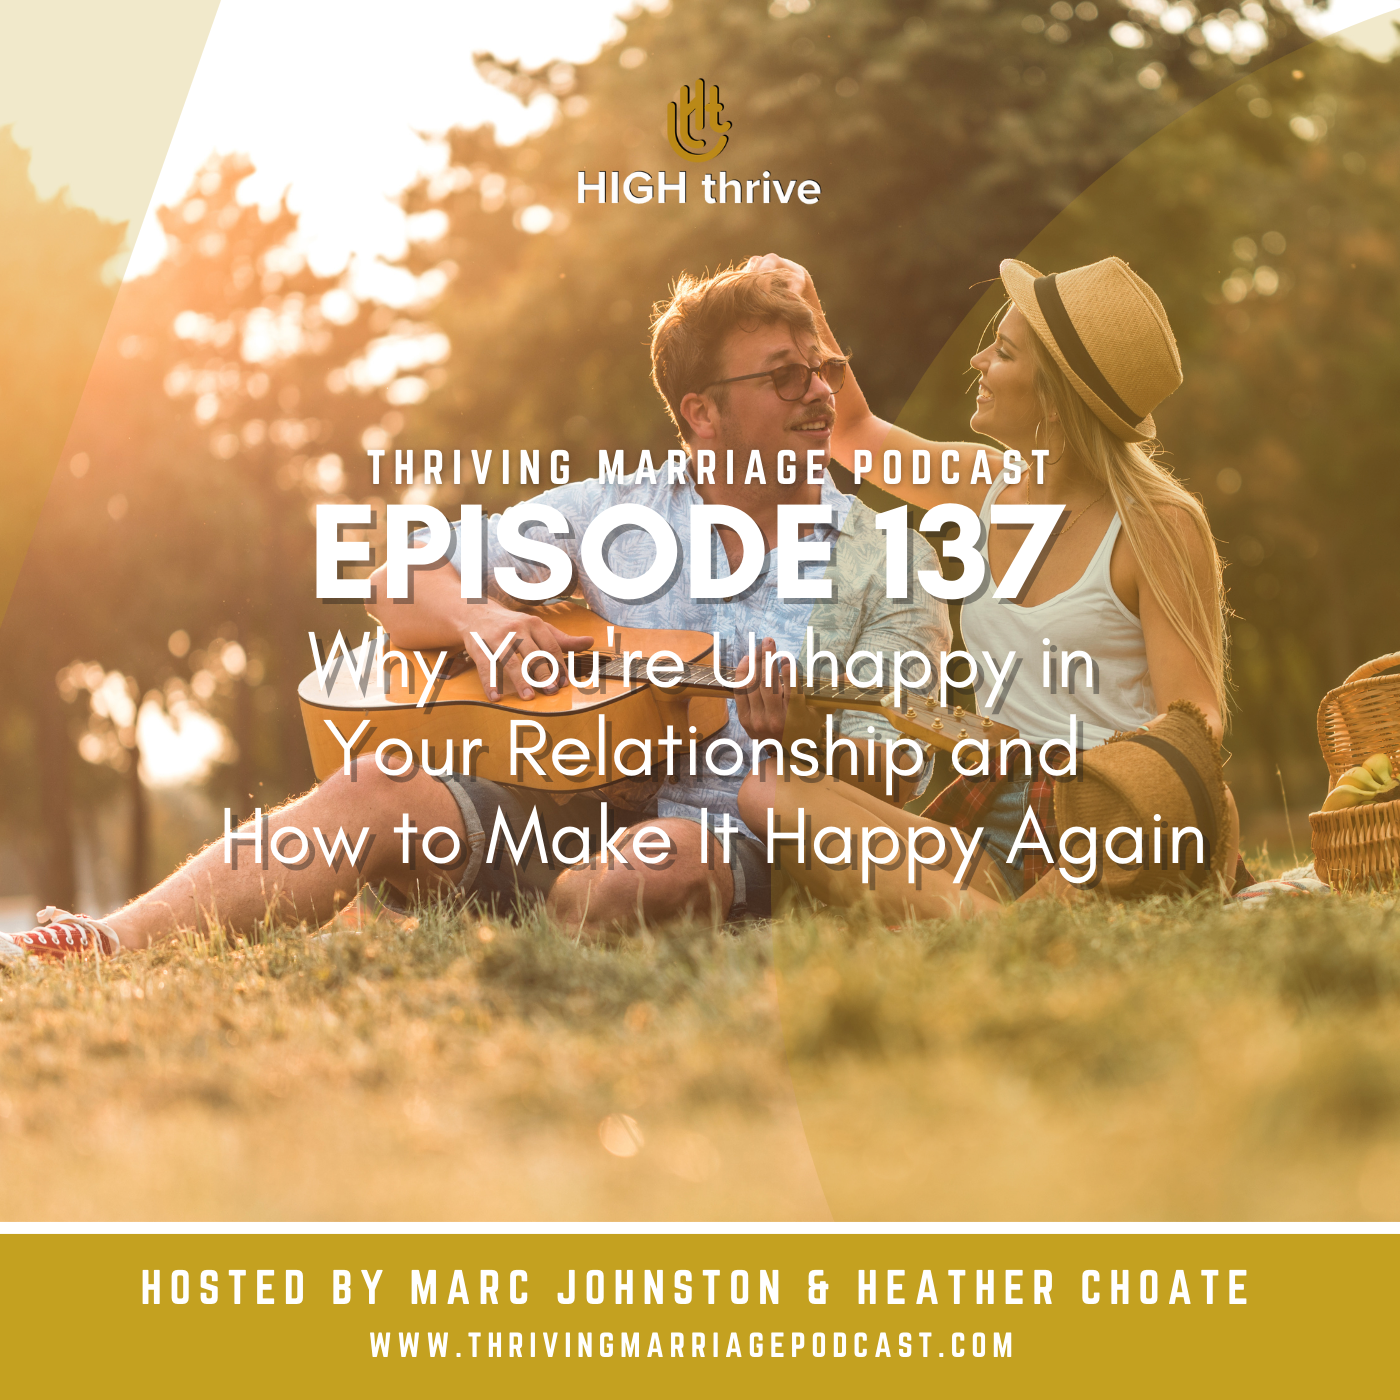 Episode 137: Why You're Unhappy in Your Relationship and How to Make It Happy Again